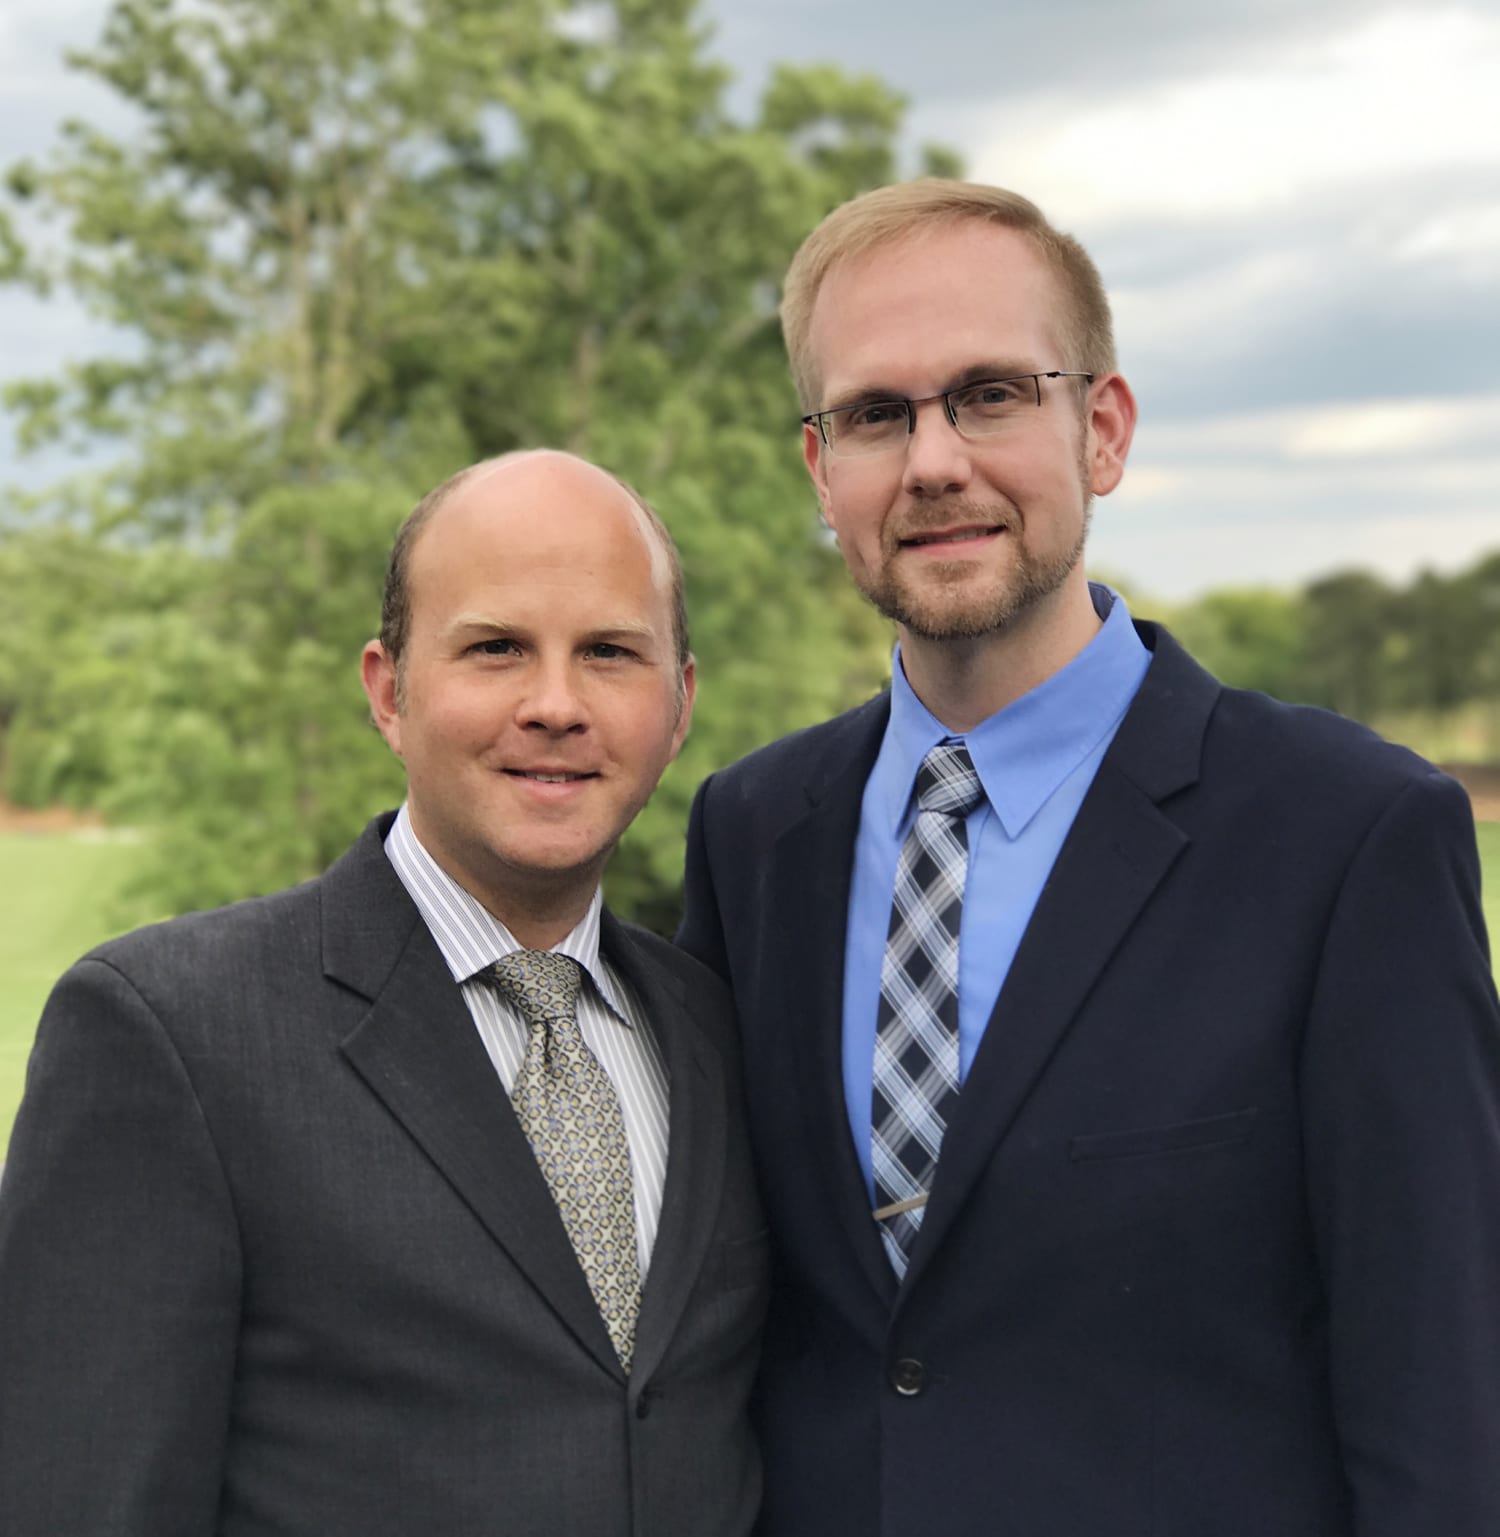 Indiana Court Dismisses Lawsuit from Homosexual Teacher Who Was Fired from Catholic High School for Being in Same-Sex Marriage